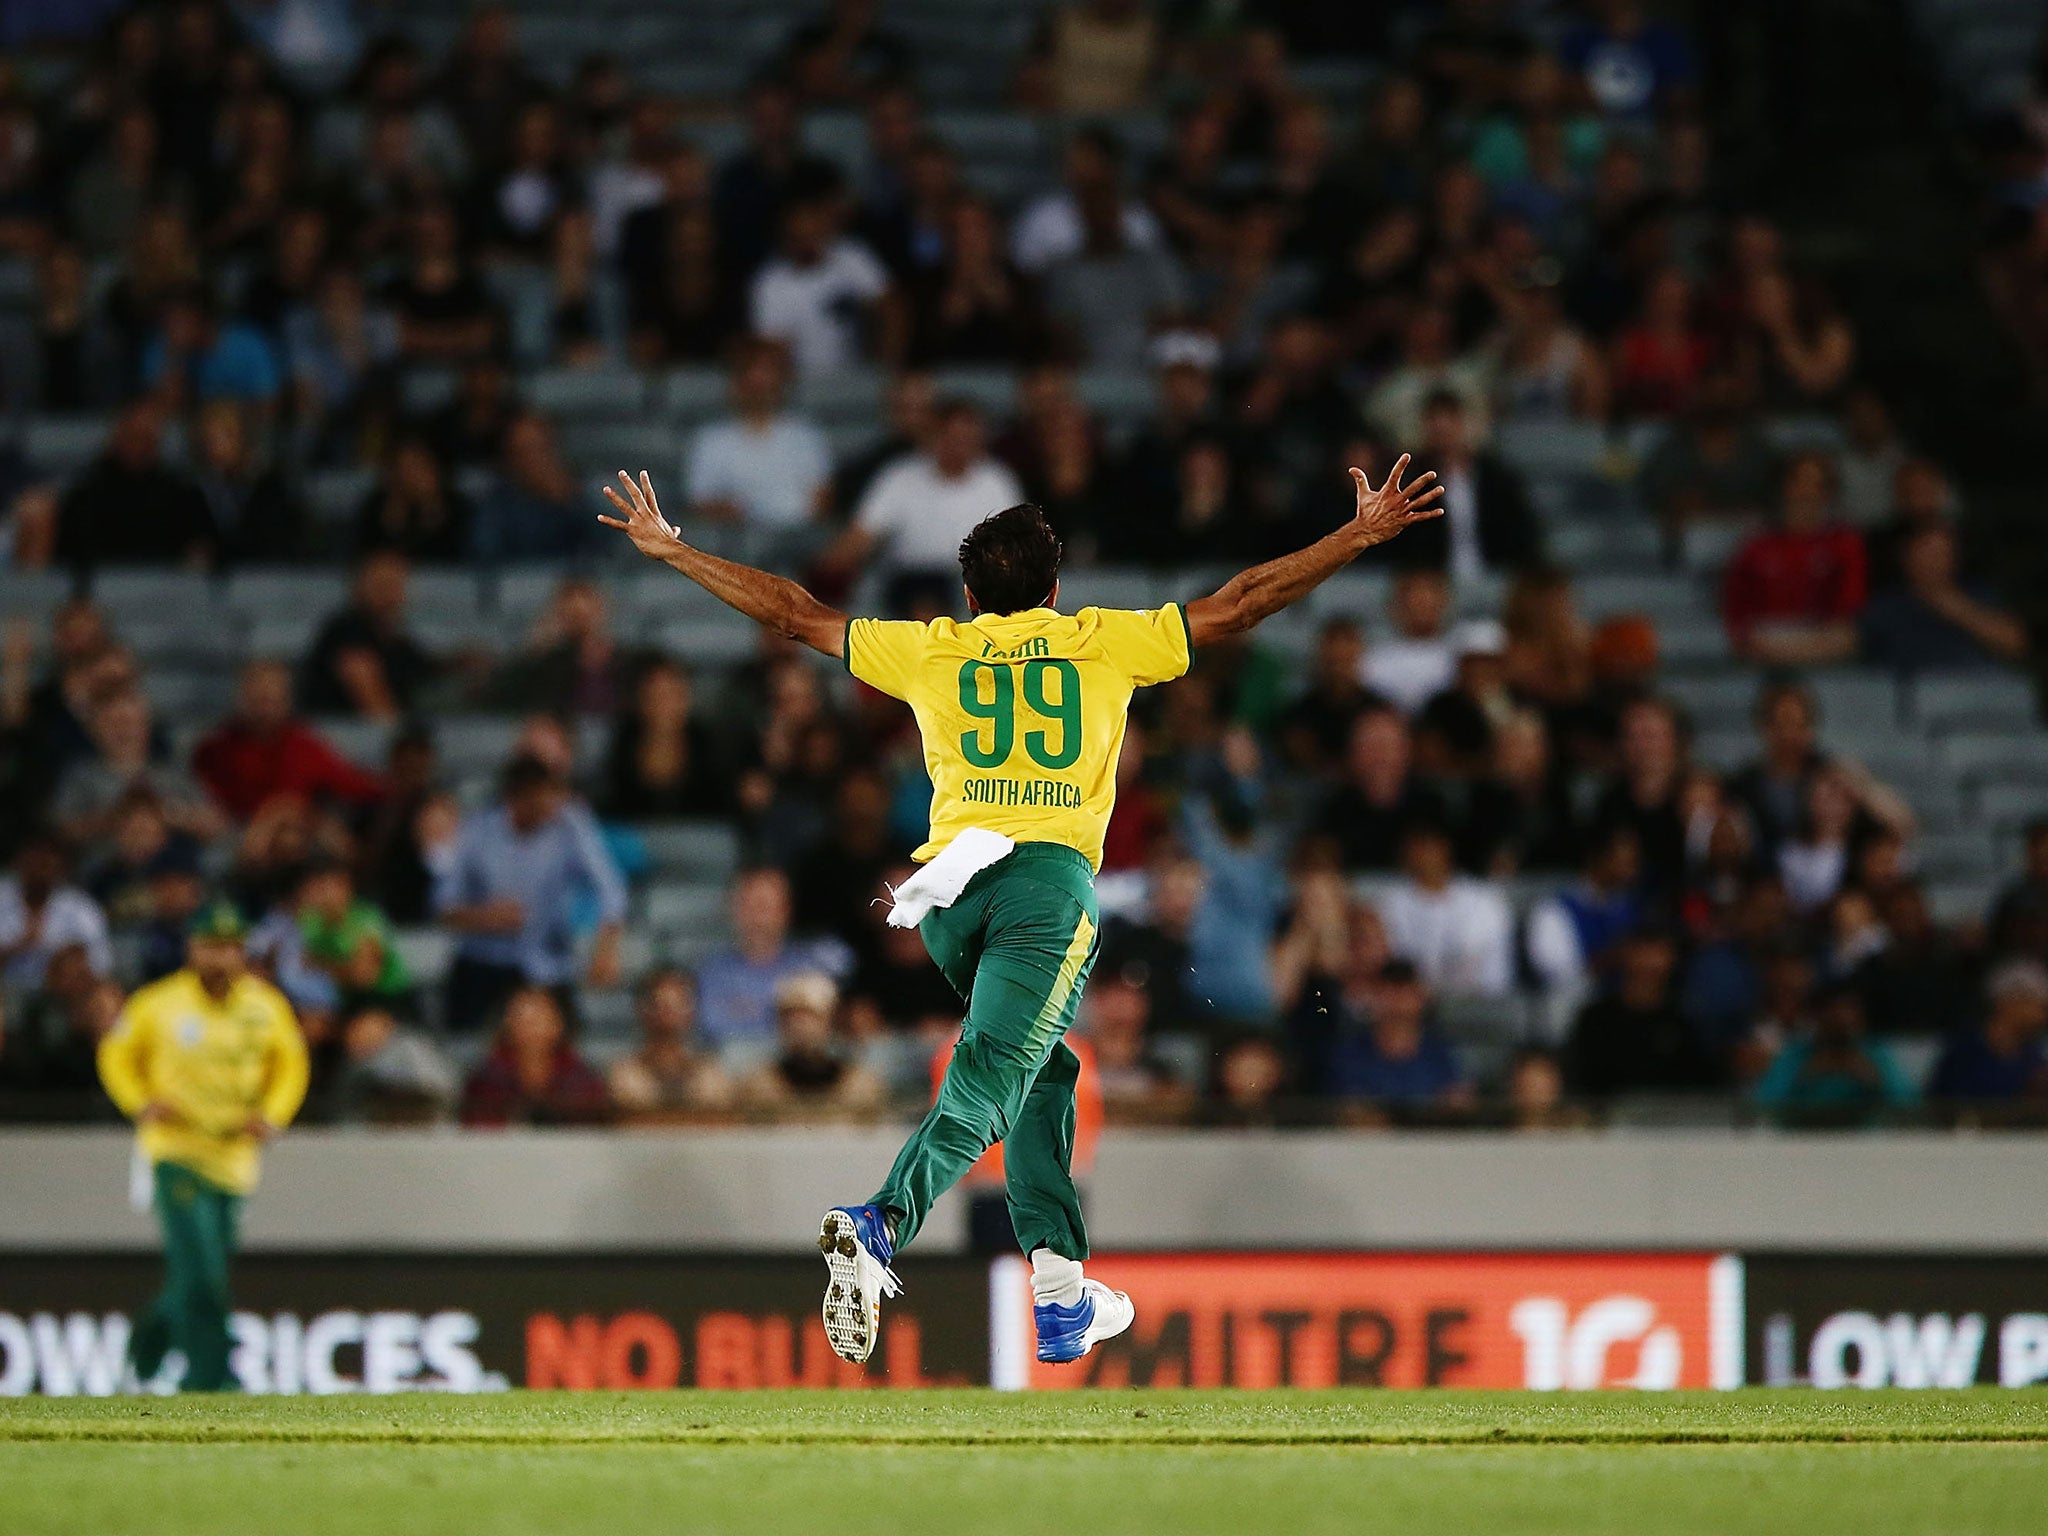 Imran Tahir celebrates after securing victory for his side